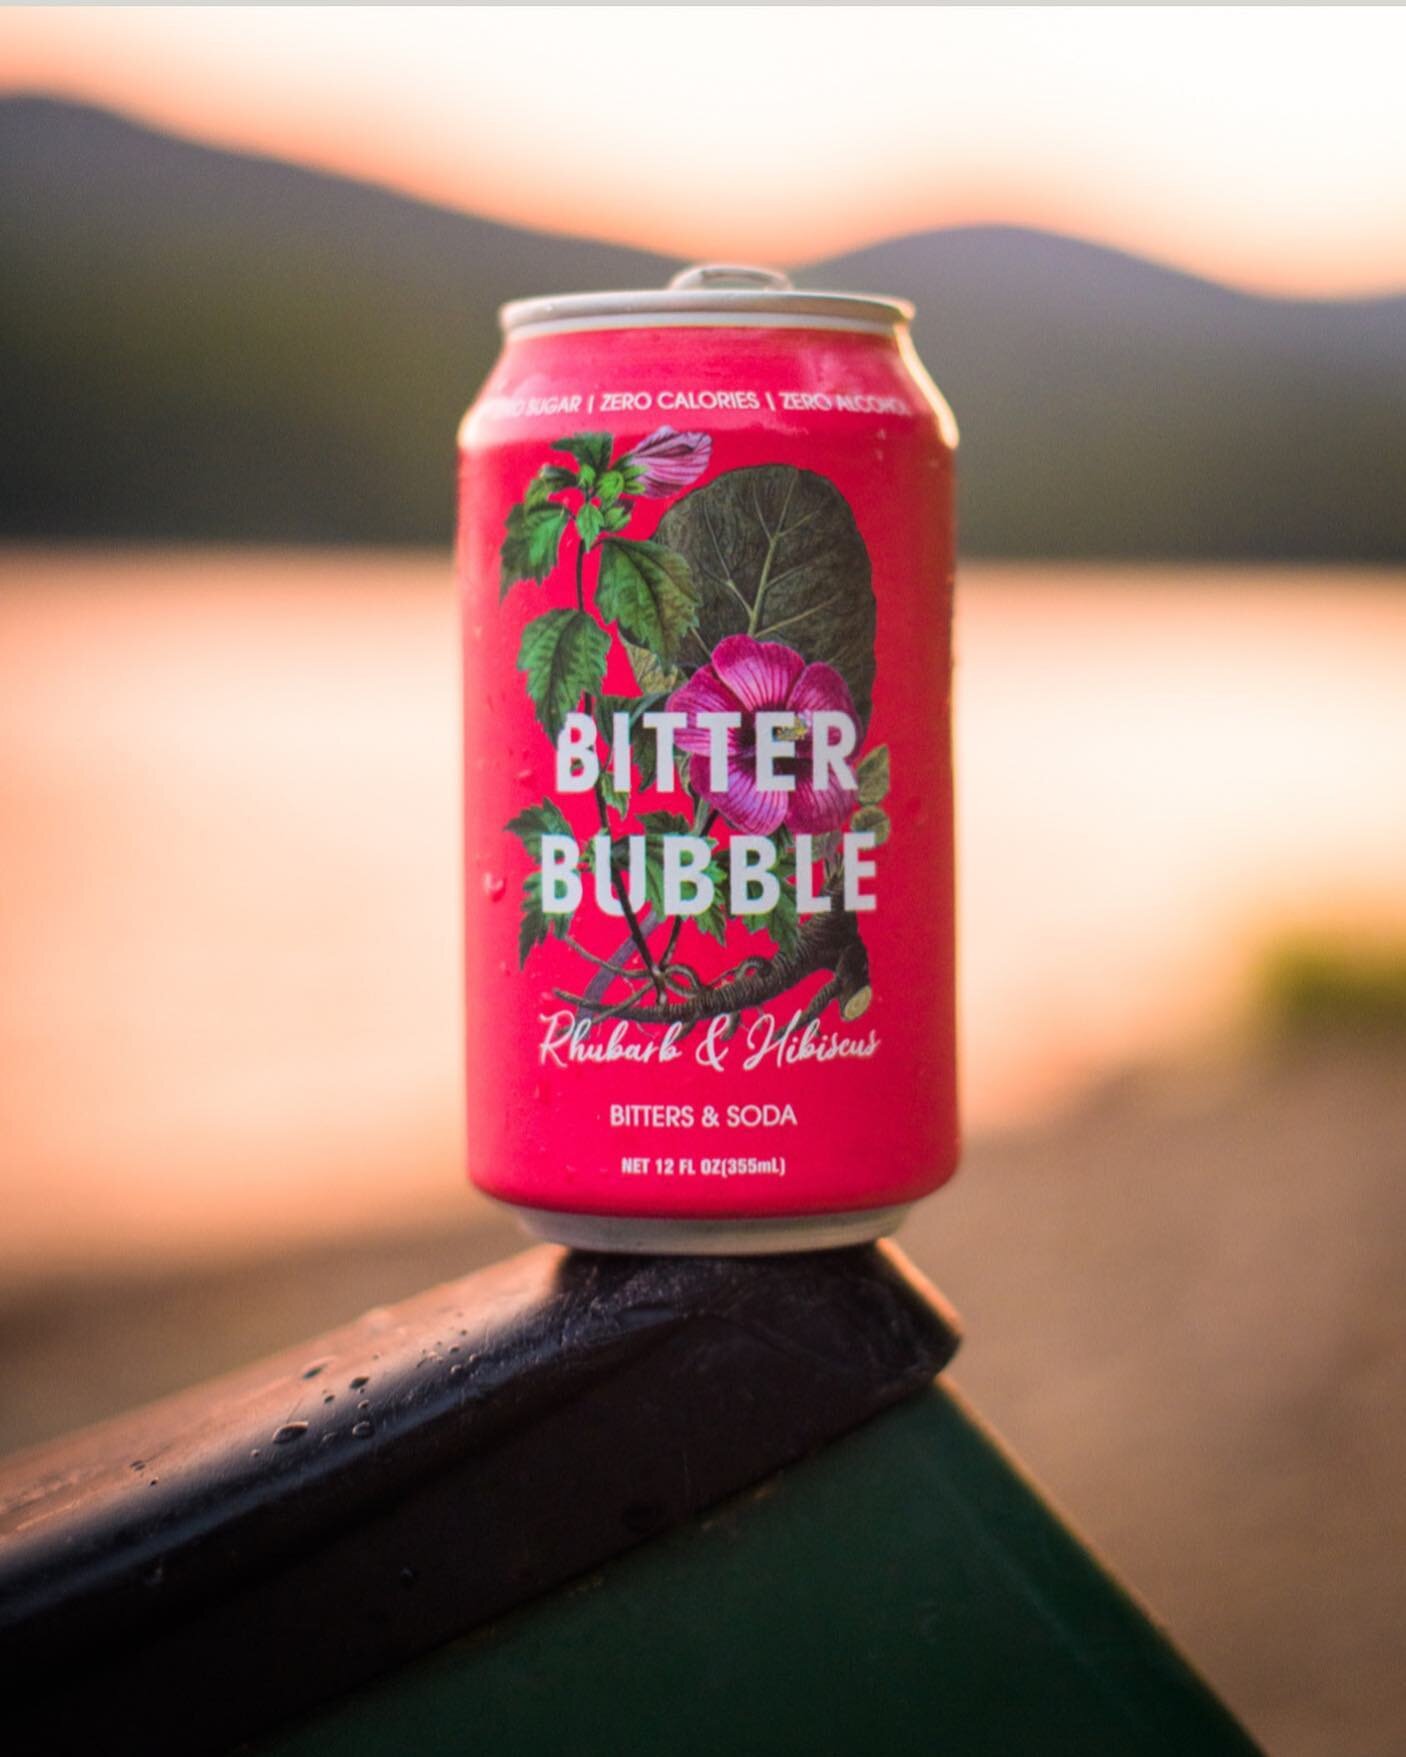 Welcome to Bitter Bubble! 
&bull;
Crafted for adventurous spirits, and inspired by teal waters, lush forests, and majestic mountains, Bitter Bubble is a blend of bitter botanicals and sparkling bubbles. 
&bull;
Refreshing and inspiring, Bitter Bubble